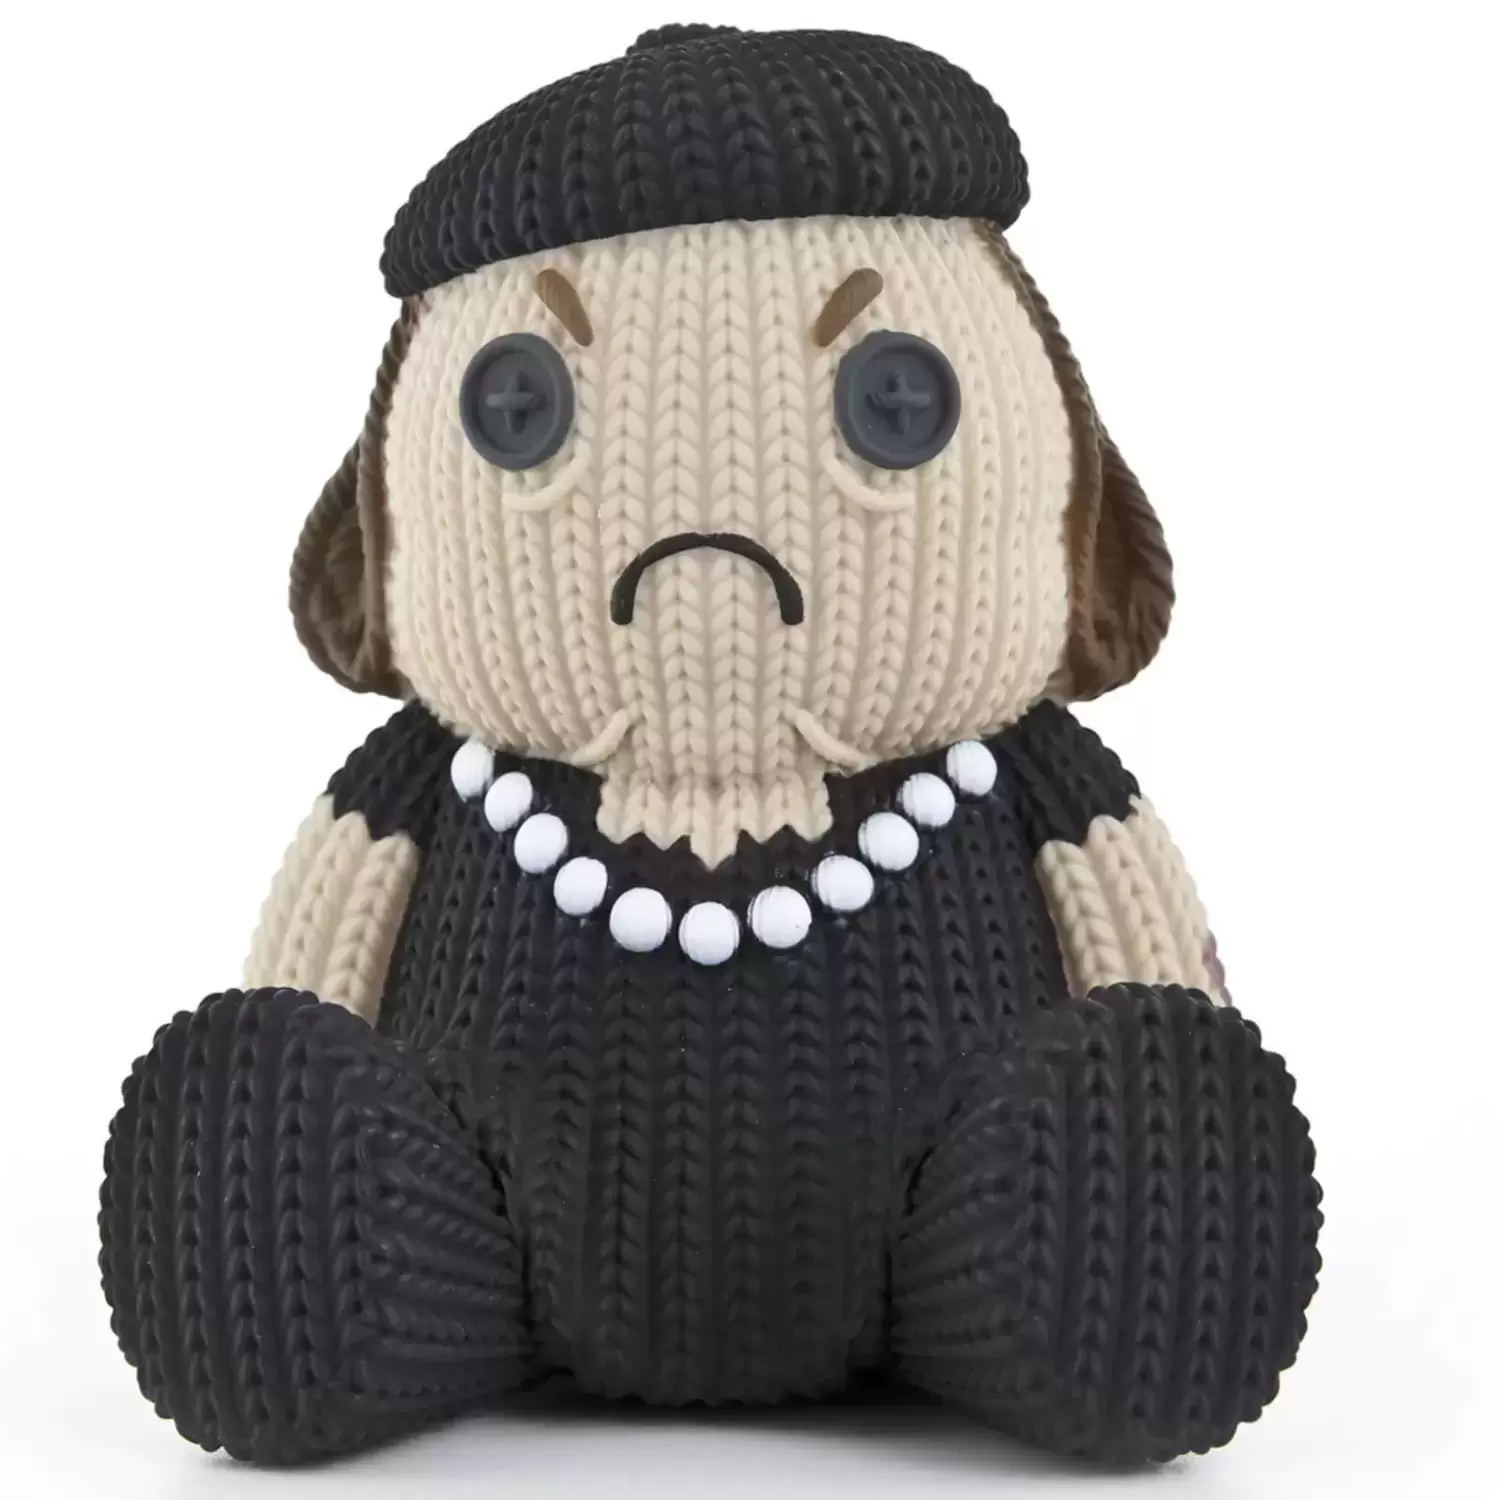 Handmade By Robots - The Goonies - Mama Fratelli